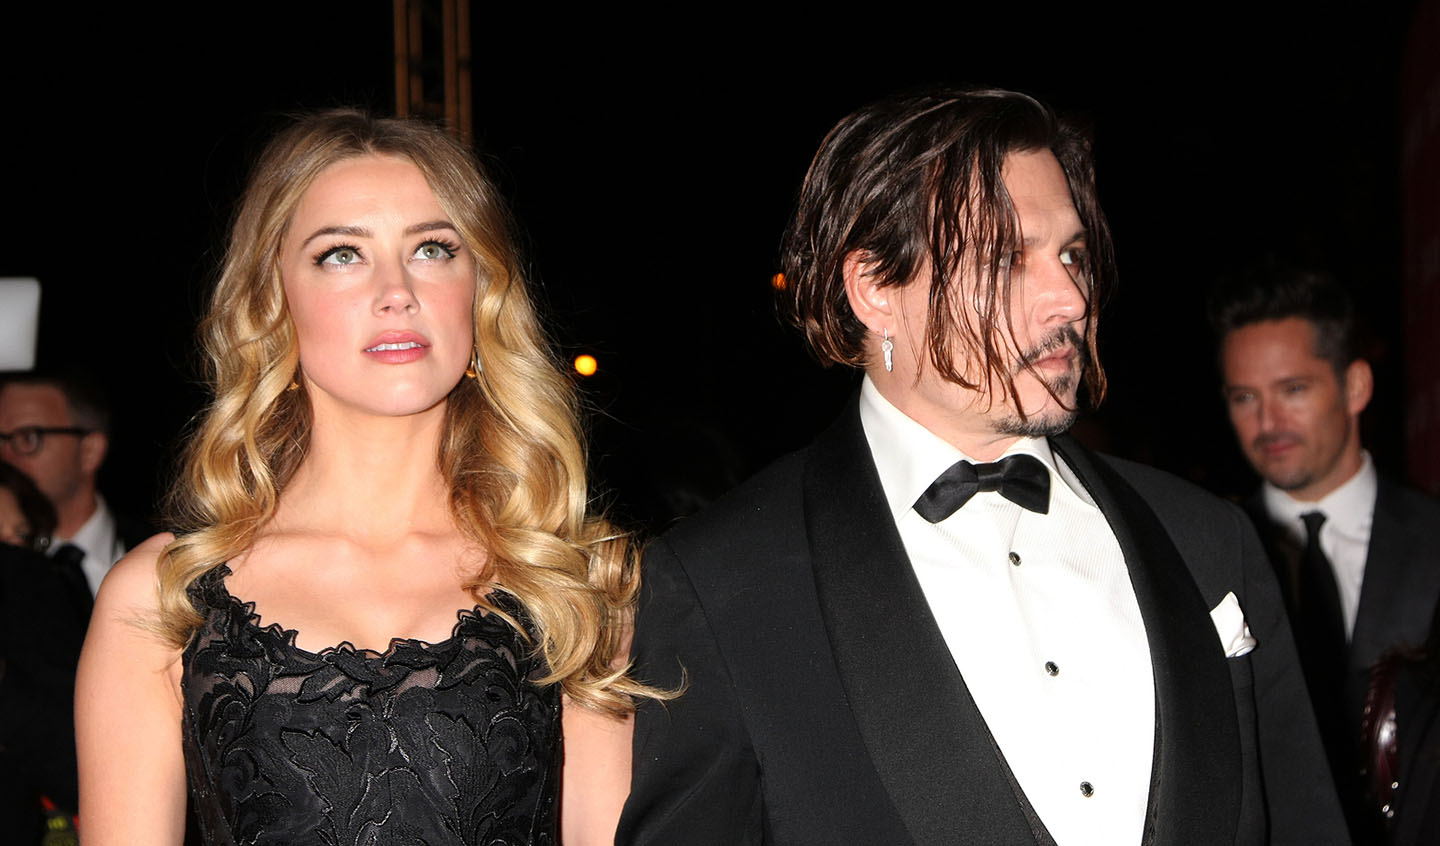 Johnny Depp and Amber Heard's rocky marriage is now hurting their film careers